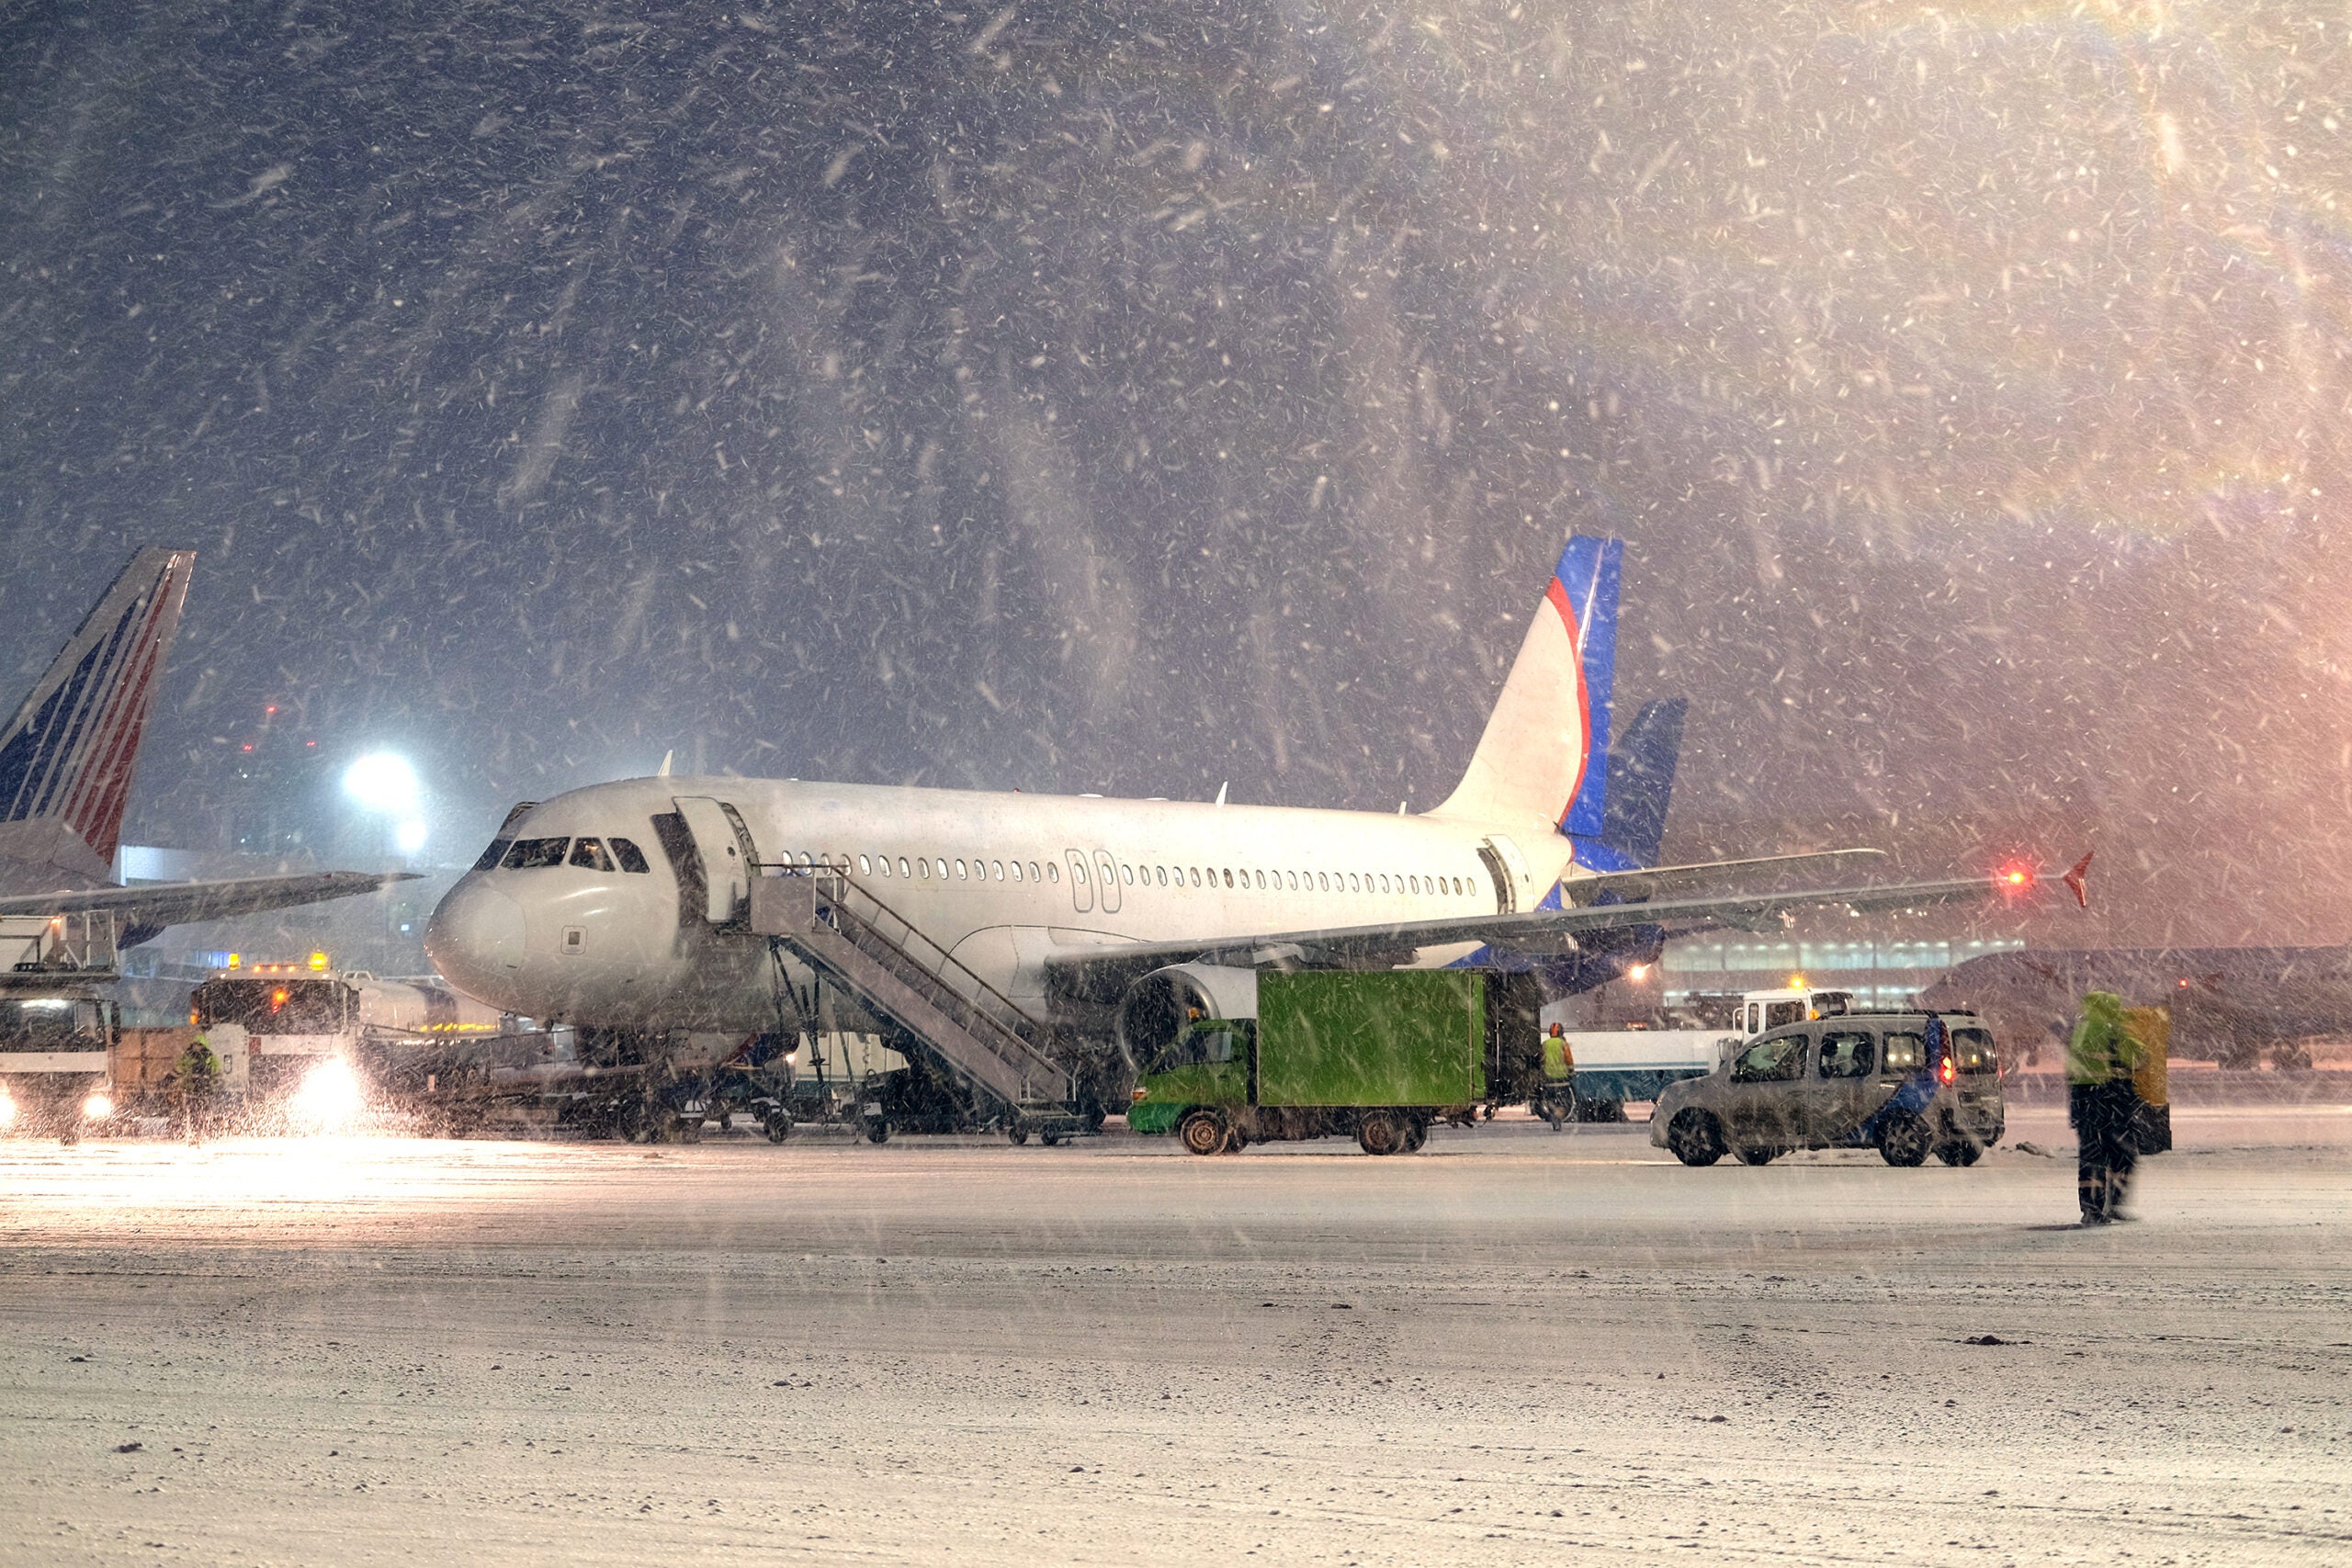 Moscow, Russia, February, 09,2015: commercial airplane parking at the airport in winter